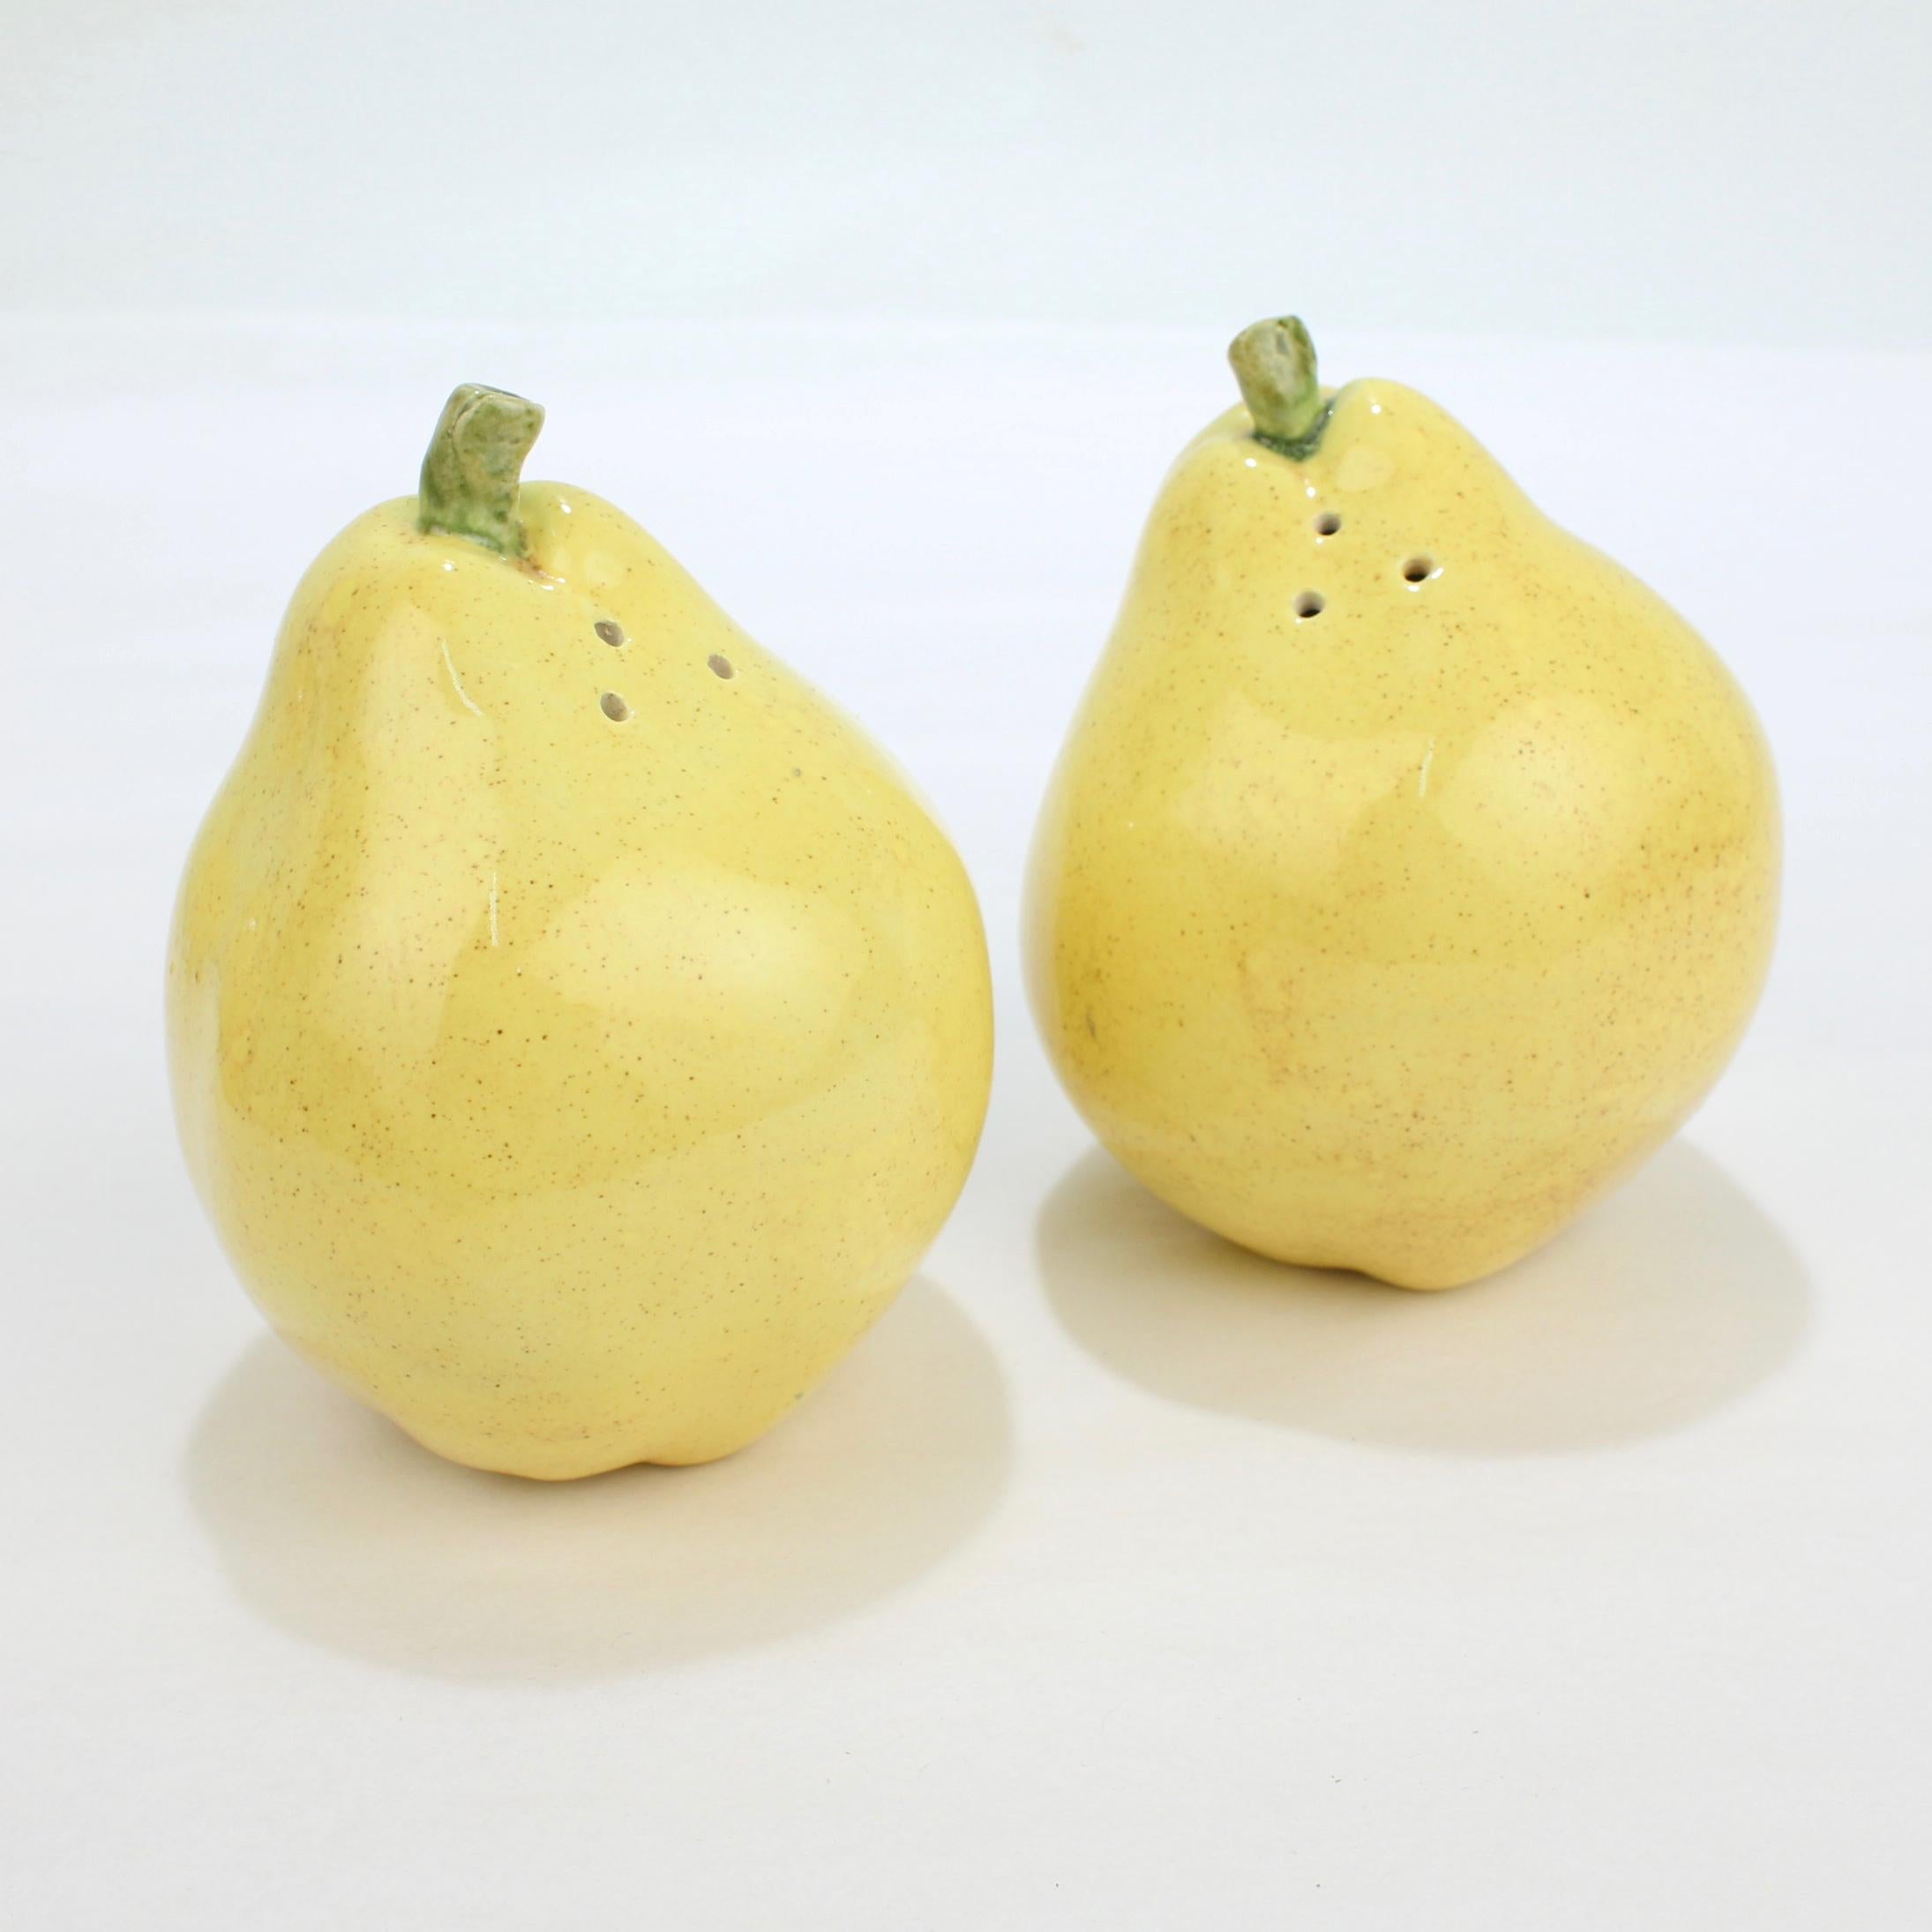 2 Pairs of Pear Shaped Yellow Pottery Salt and Pepper Shakers For Sale 2